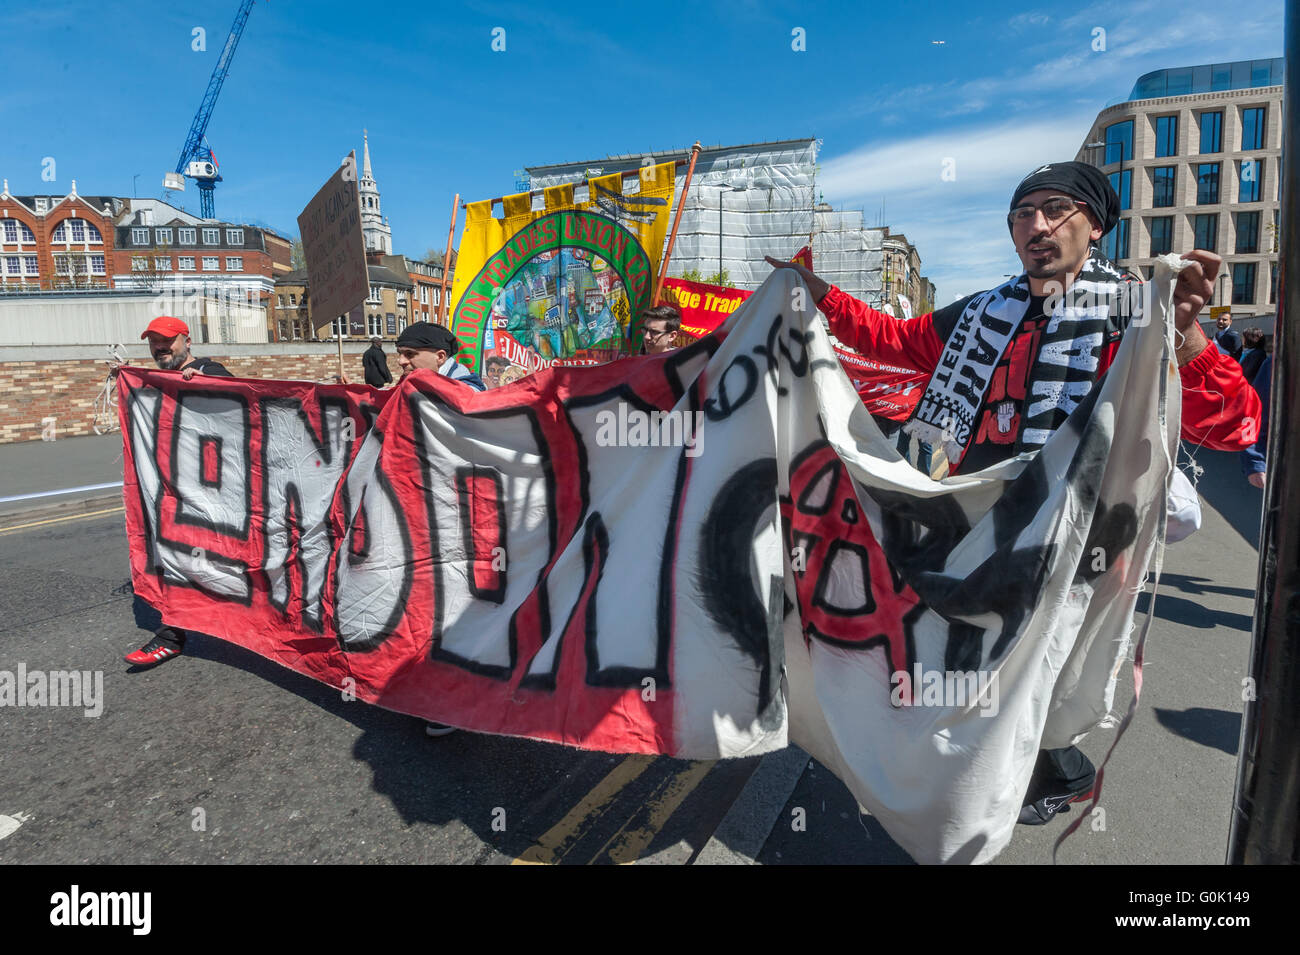 London, UK. 1st May, 2016. Socialists celebrate International Workers Day with a march from Clekenwell Green to Trafalgar Square. Turkish football supporters in London Aarsi on the march. Peter Marshall/Alamy Live News Stock Photo